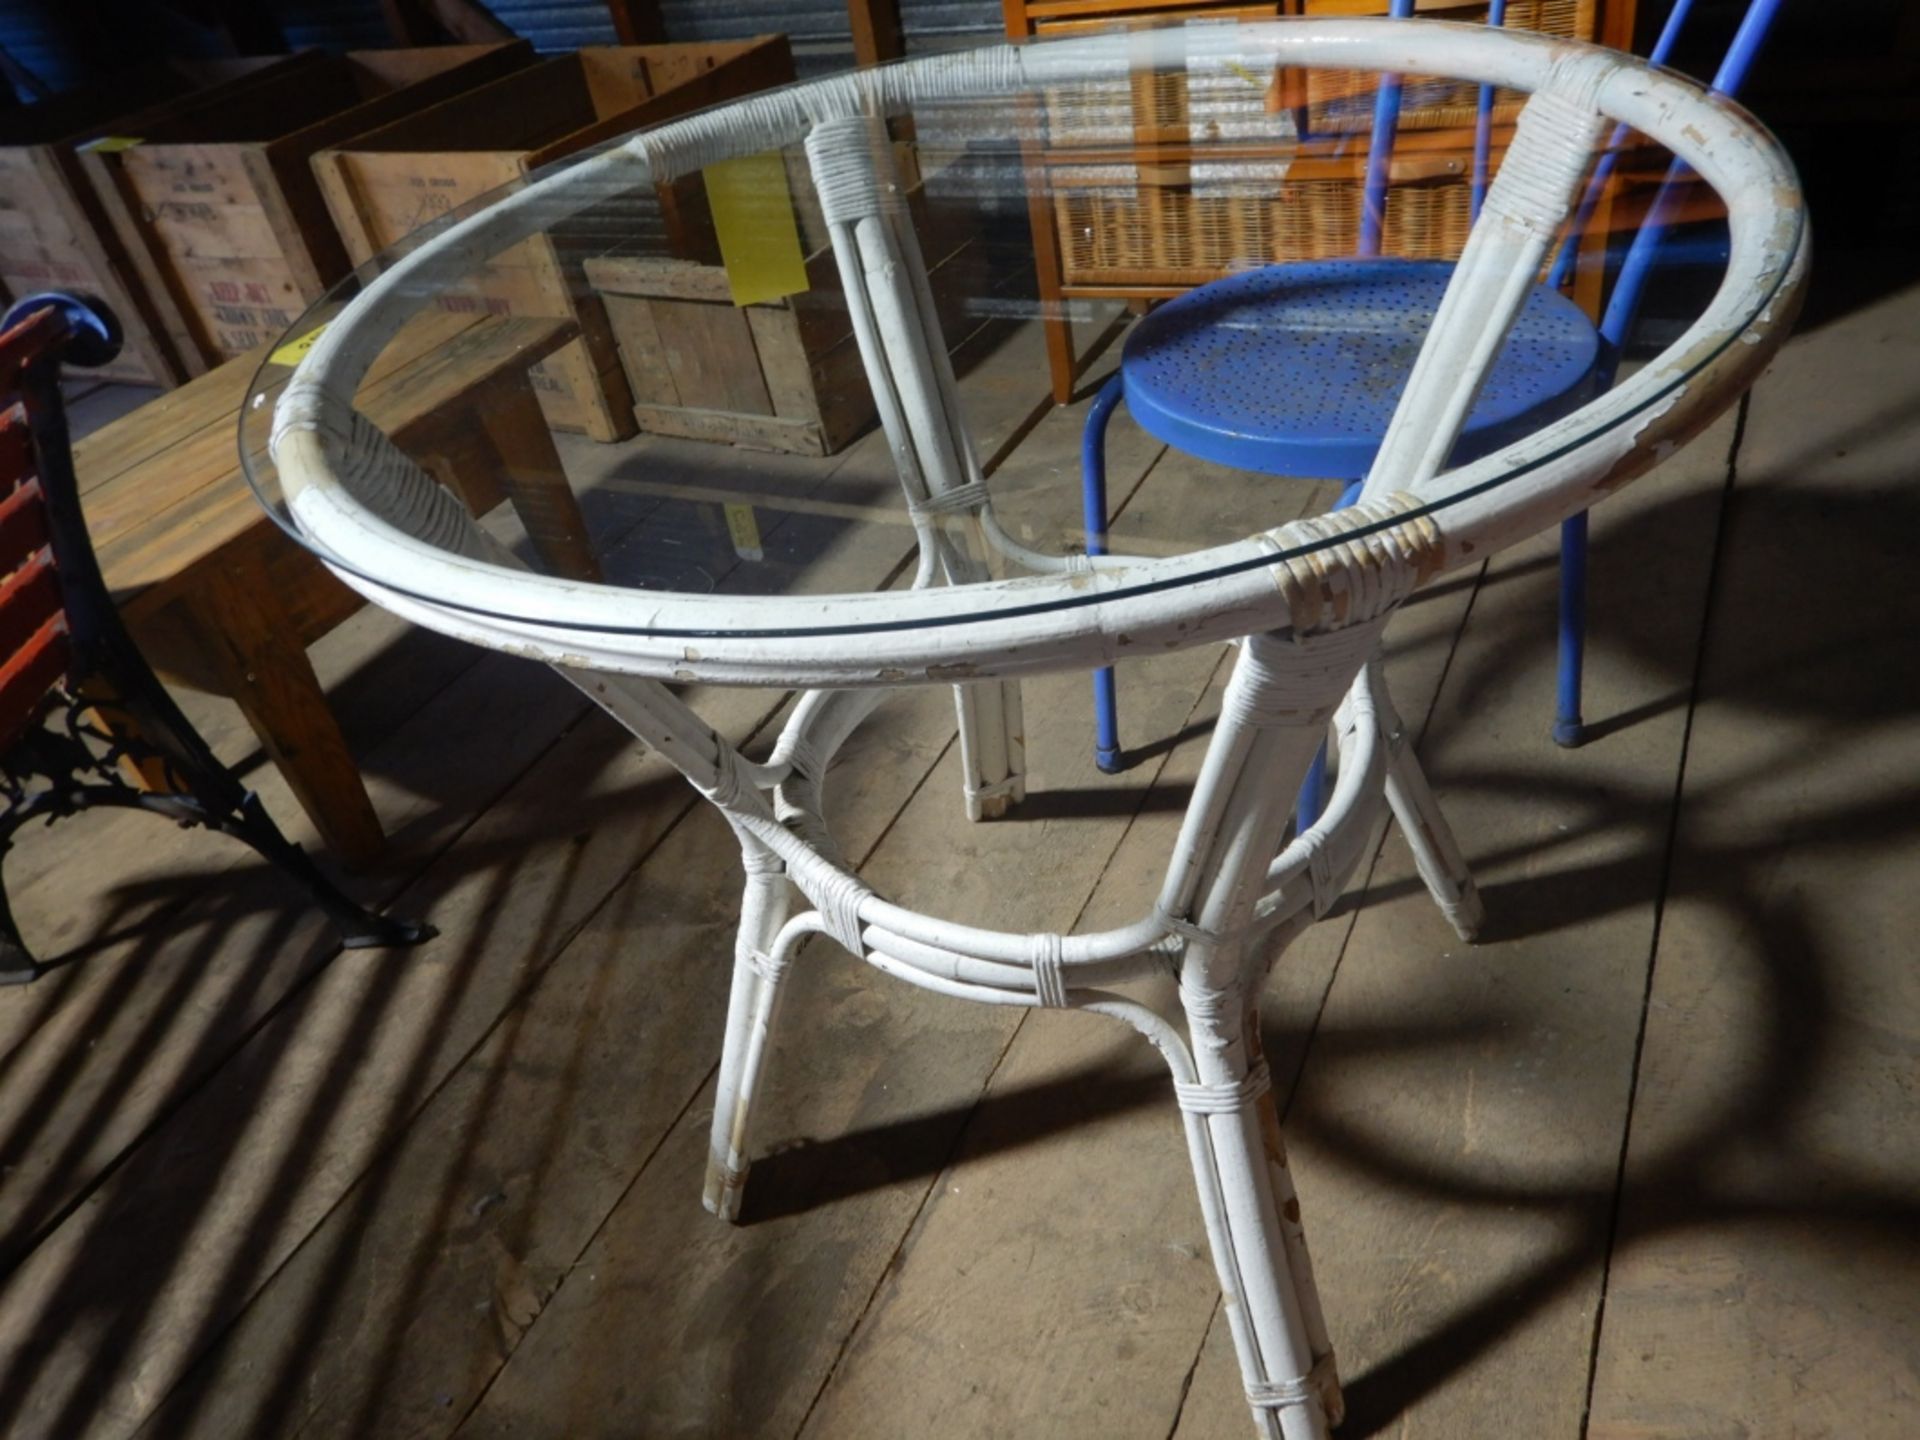 ROUND WICKER TABLE W/GLASS TOP, METAL ICE CREAM SYLE SIDE CHAIR - Image 2 of 2